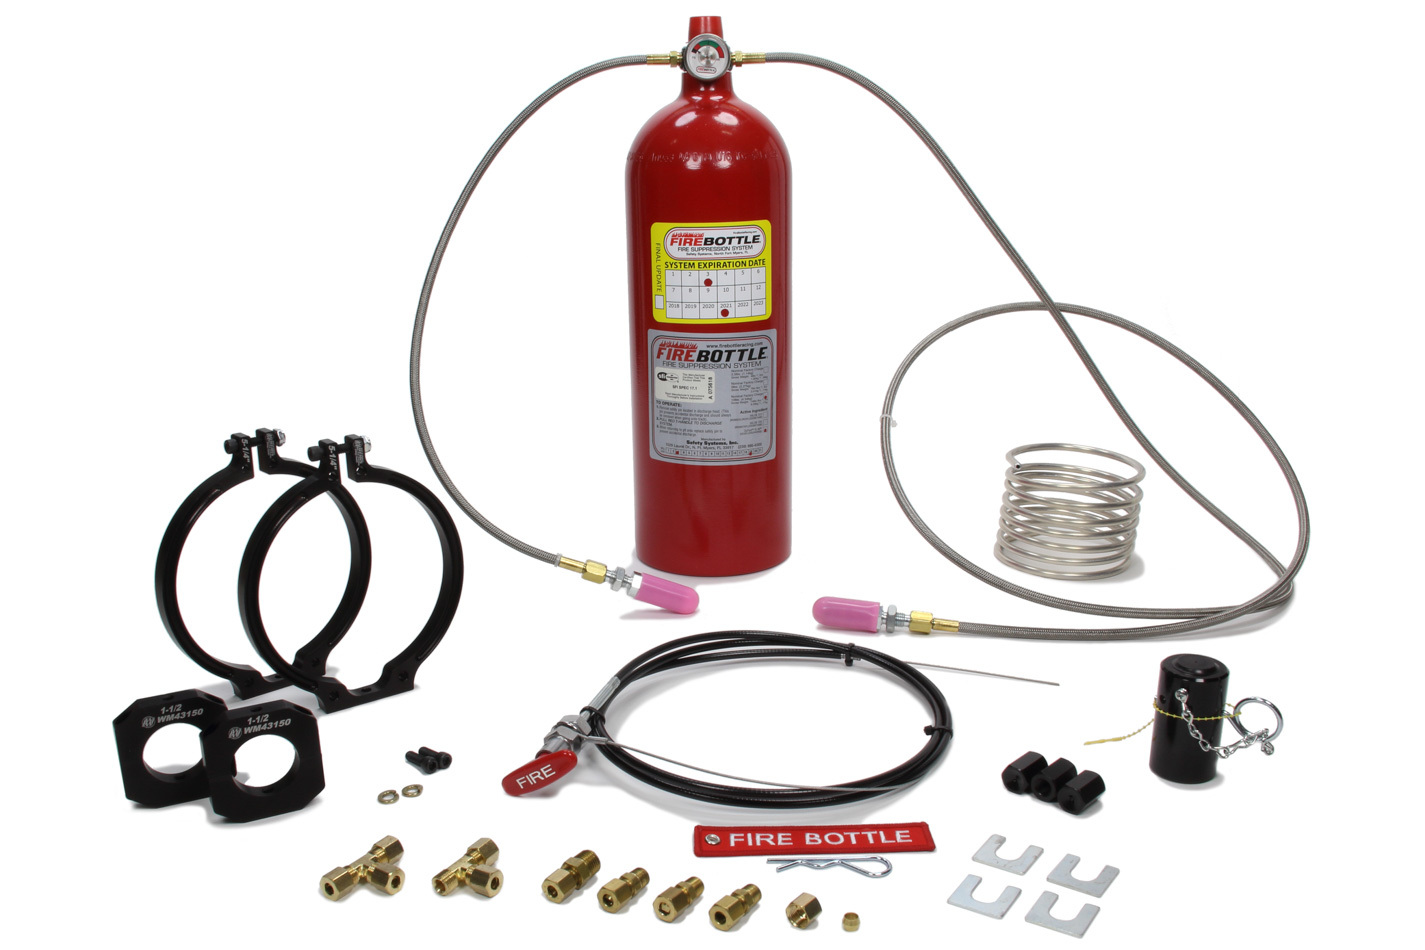 Safety Systems PAMRC-1002 - Fire Suppression System, Automatic / Manual, FE-36, SFI Rated, 10.0 lb Bottle, Fittings / Hose / Manual Head / Mount / Pull Cable, Kit